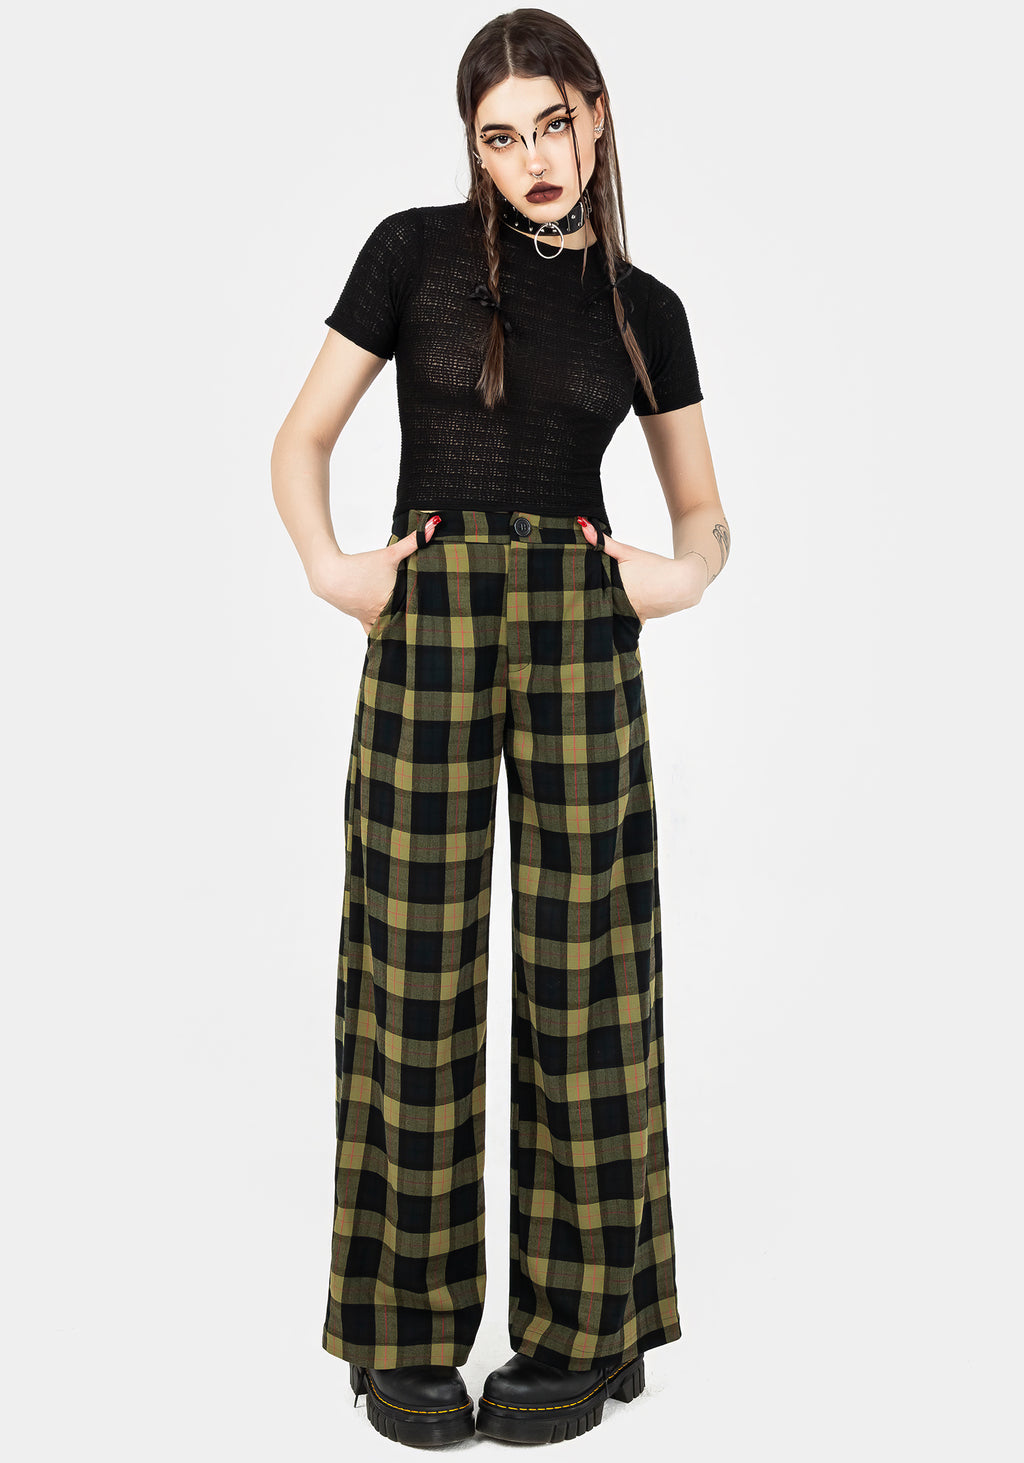 Womens Clueless Style Lined High Waisted Tartan Check Trousers -  Mustard/Navy | eBay